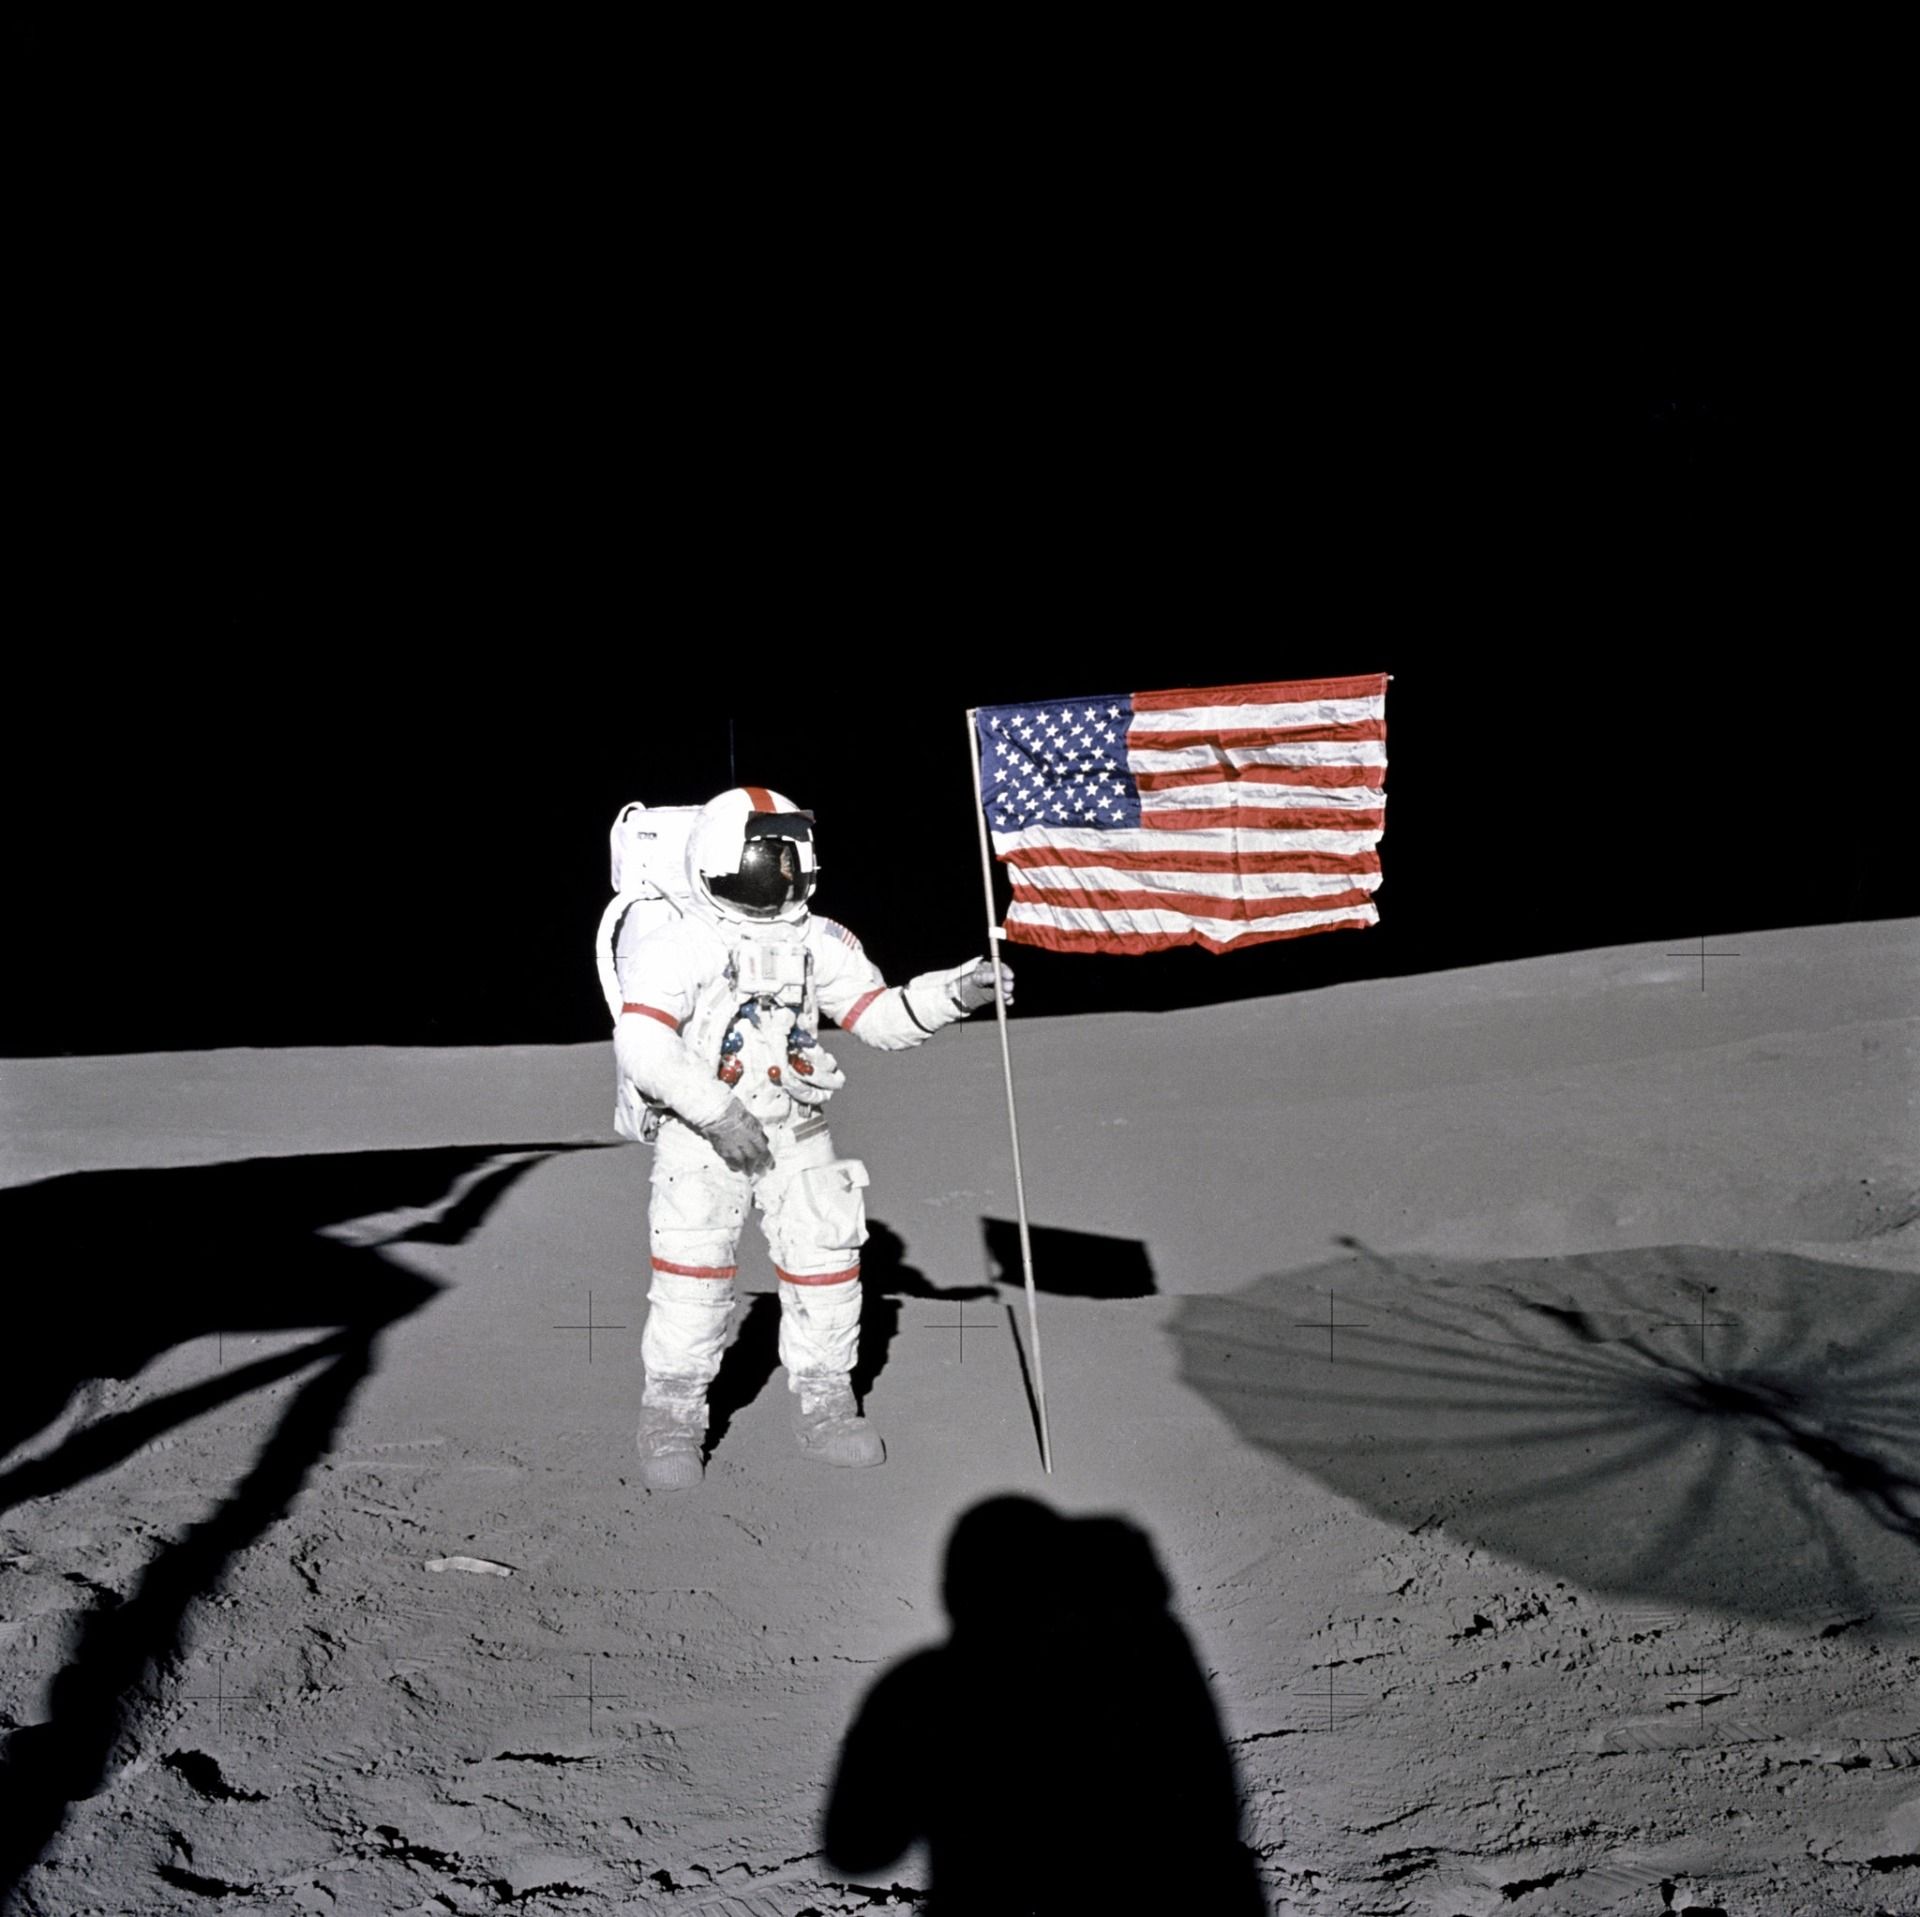 Shepard planting flag on the Moon